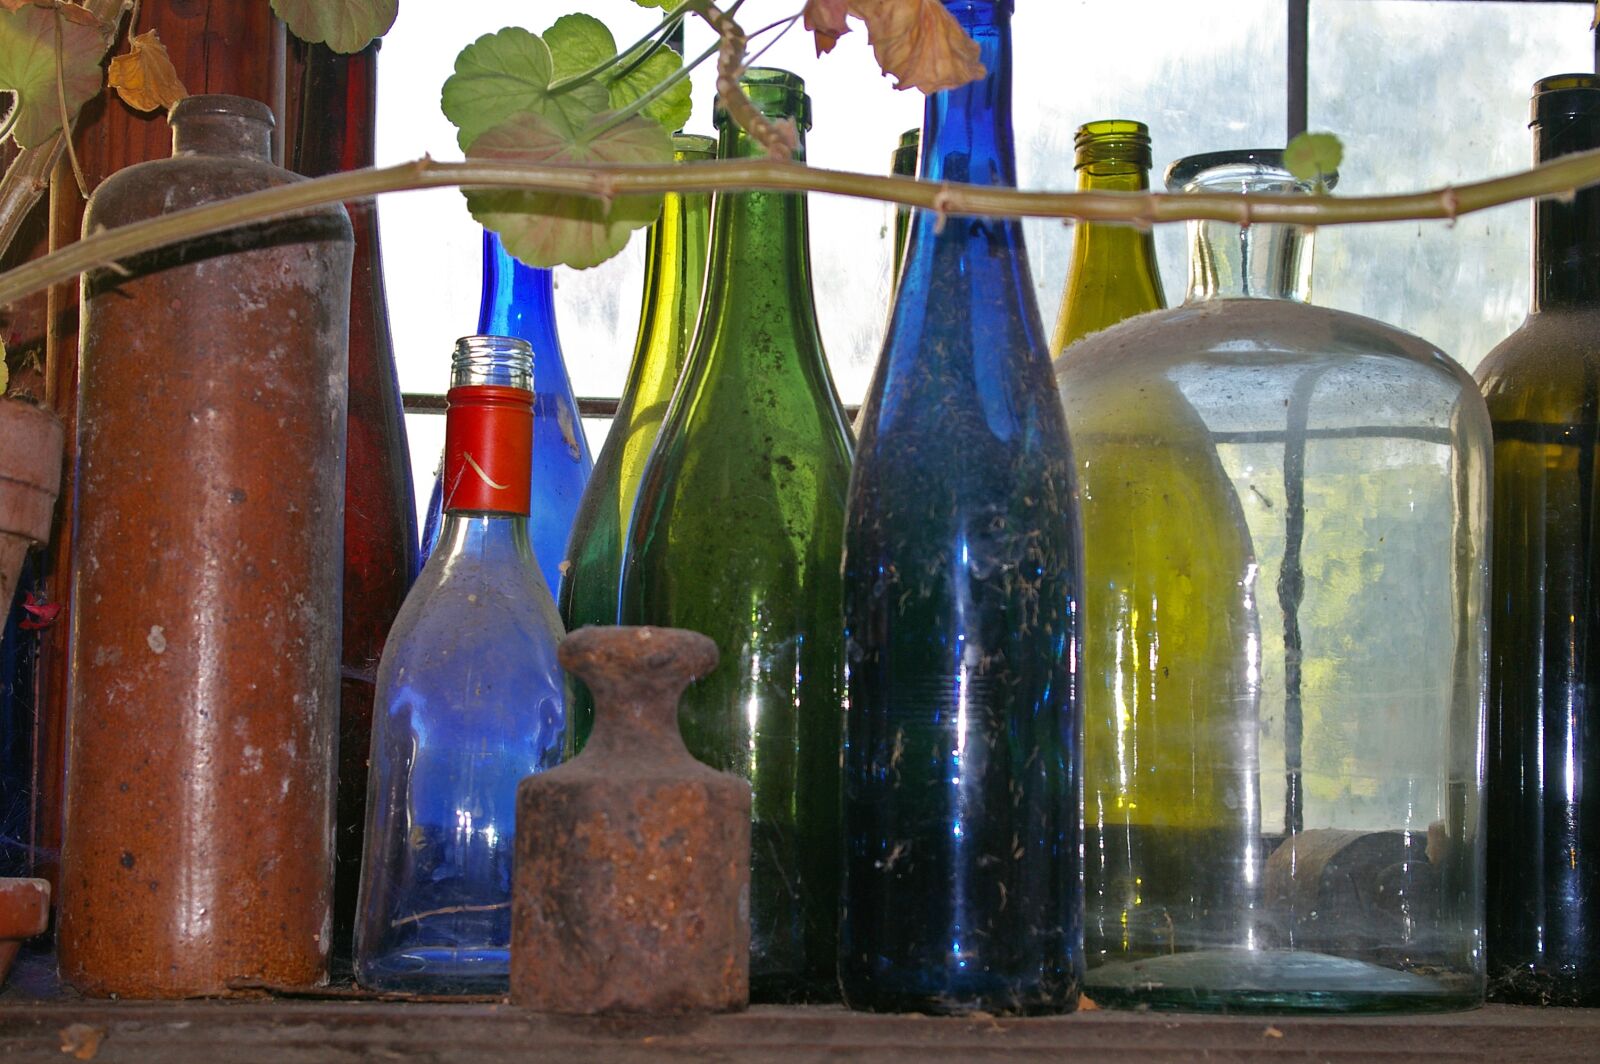 Pentax *ist DL2 sample photo. Old bottles, dusty, colorful photography